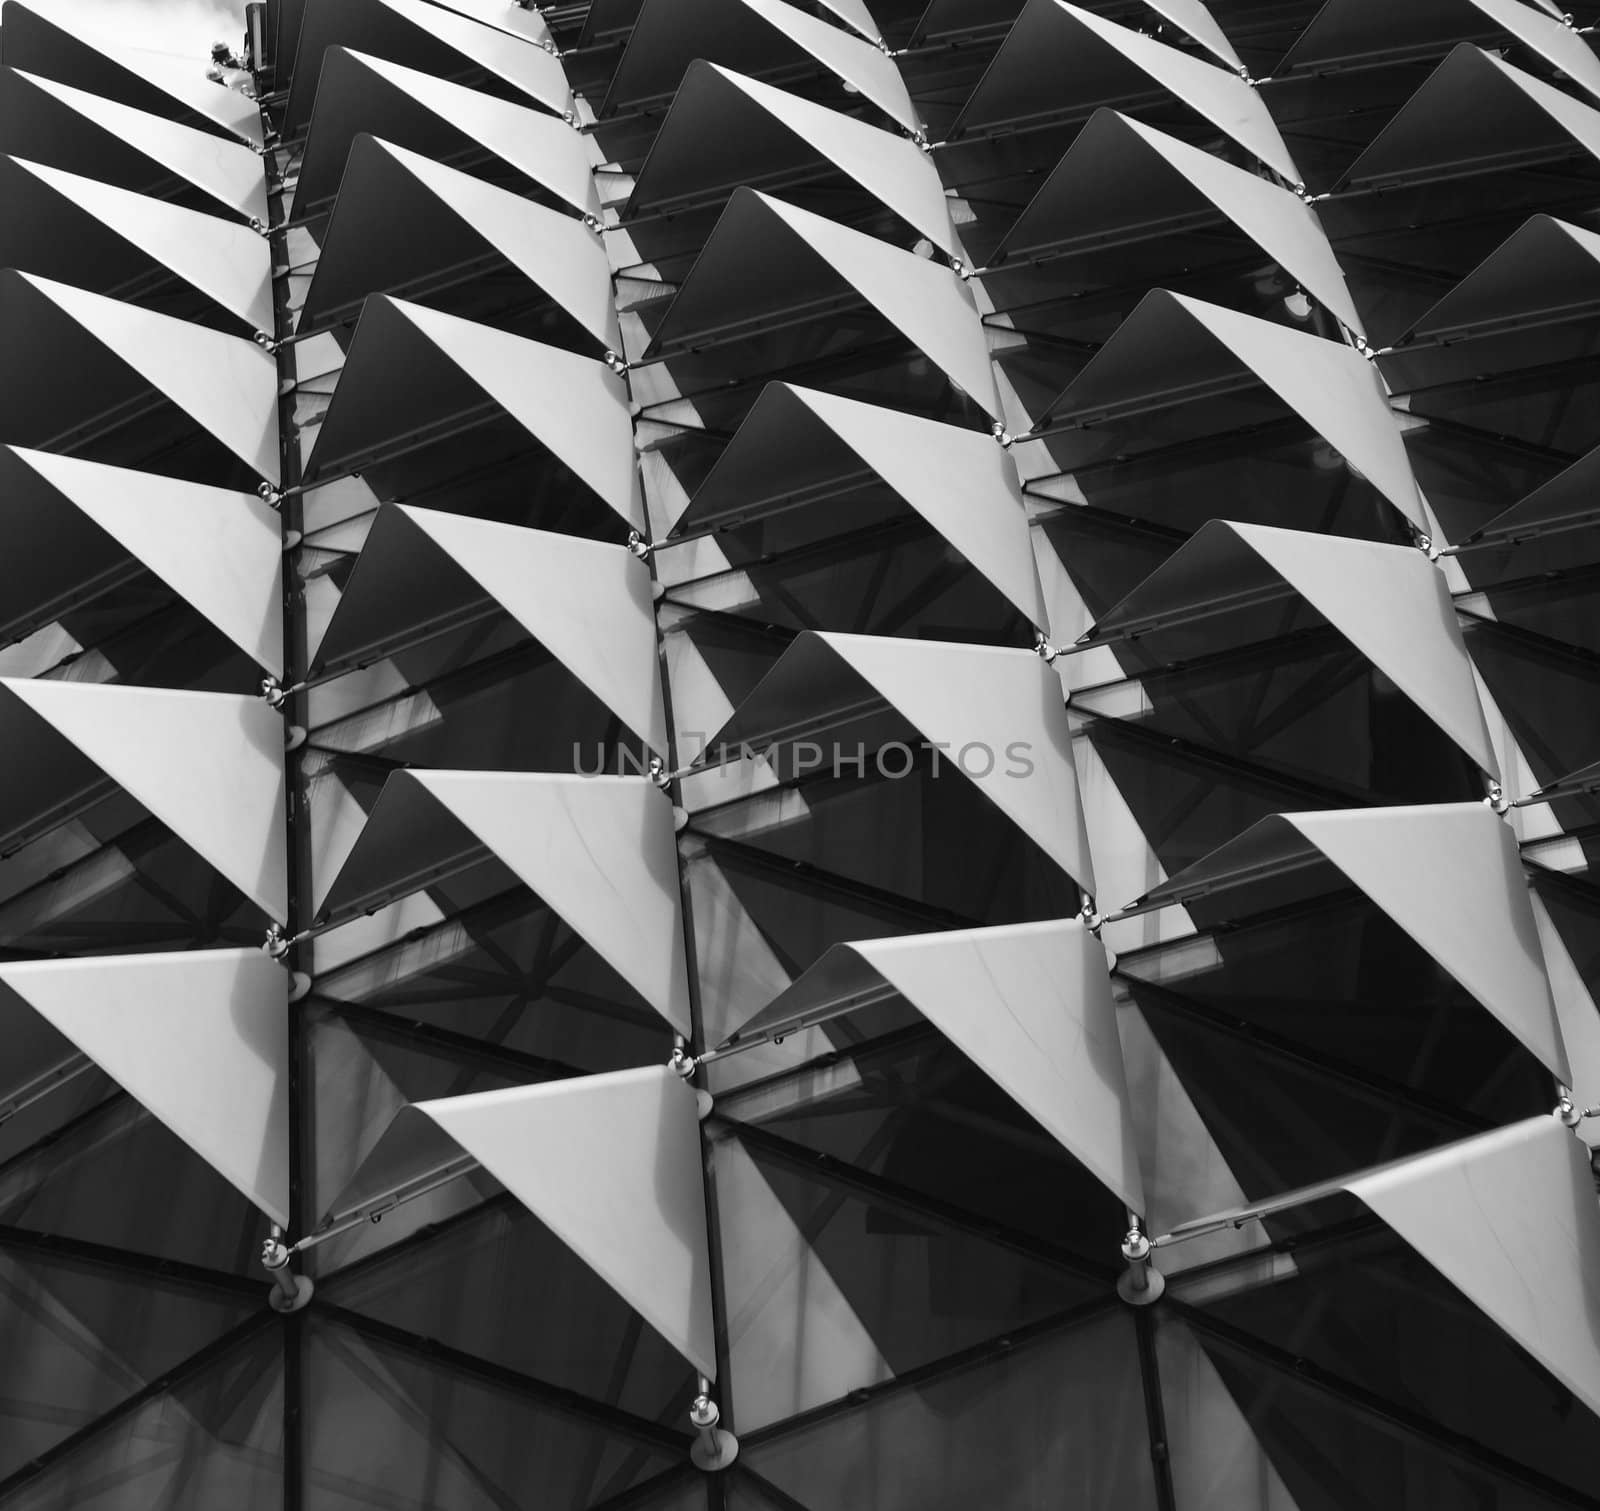 Roof of Esplanade, a landmark building in Singapore form a pattern in black and white can use in design.